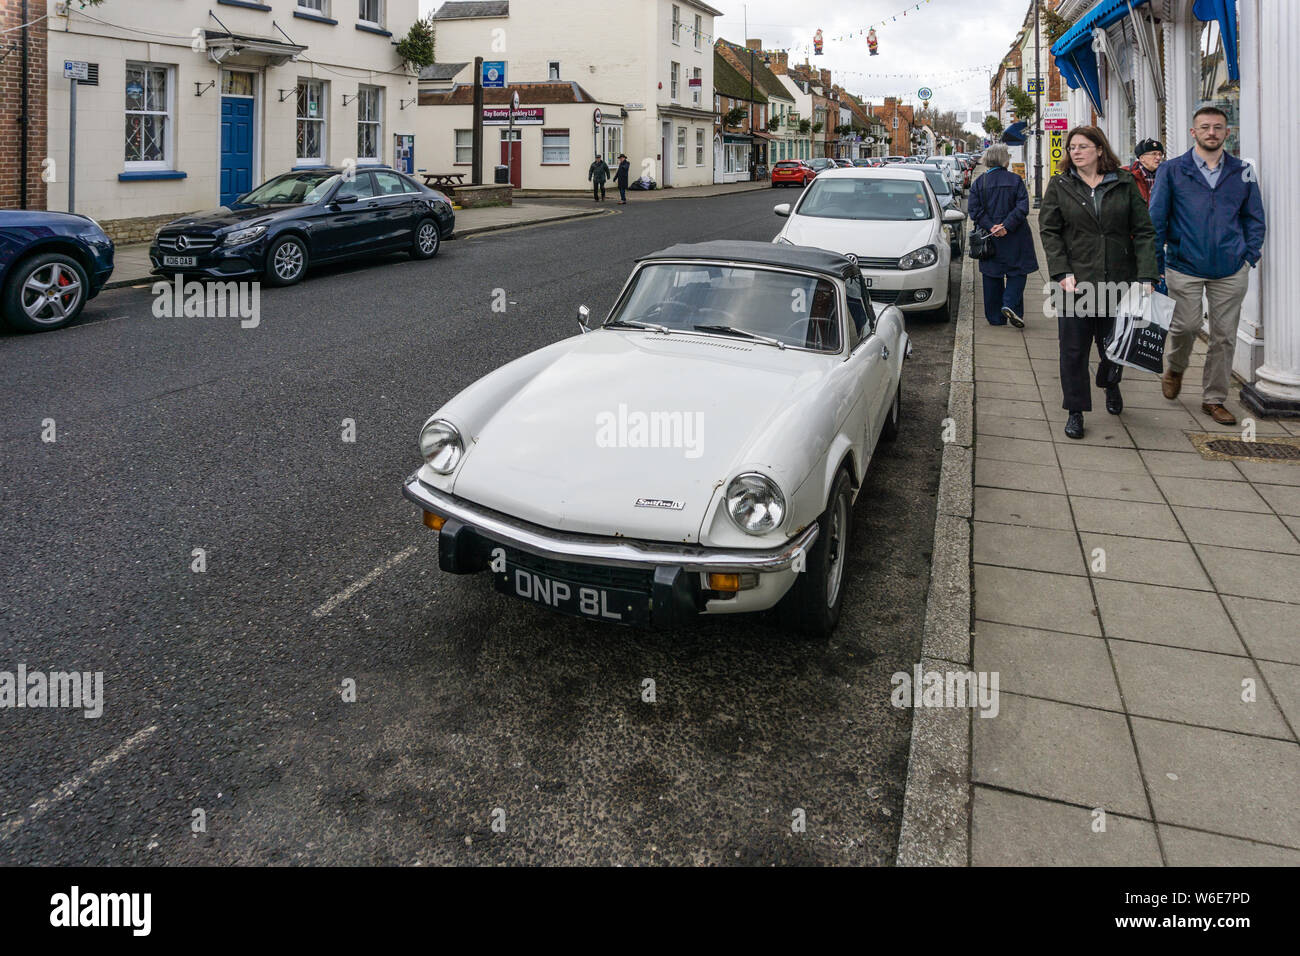 A woman shopper throws an admiring glance at a classic white Spitfire sports car, High Street, Stony Stratford, UK Stock Photo